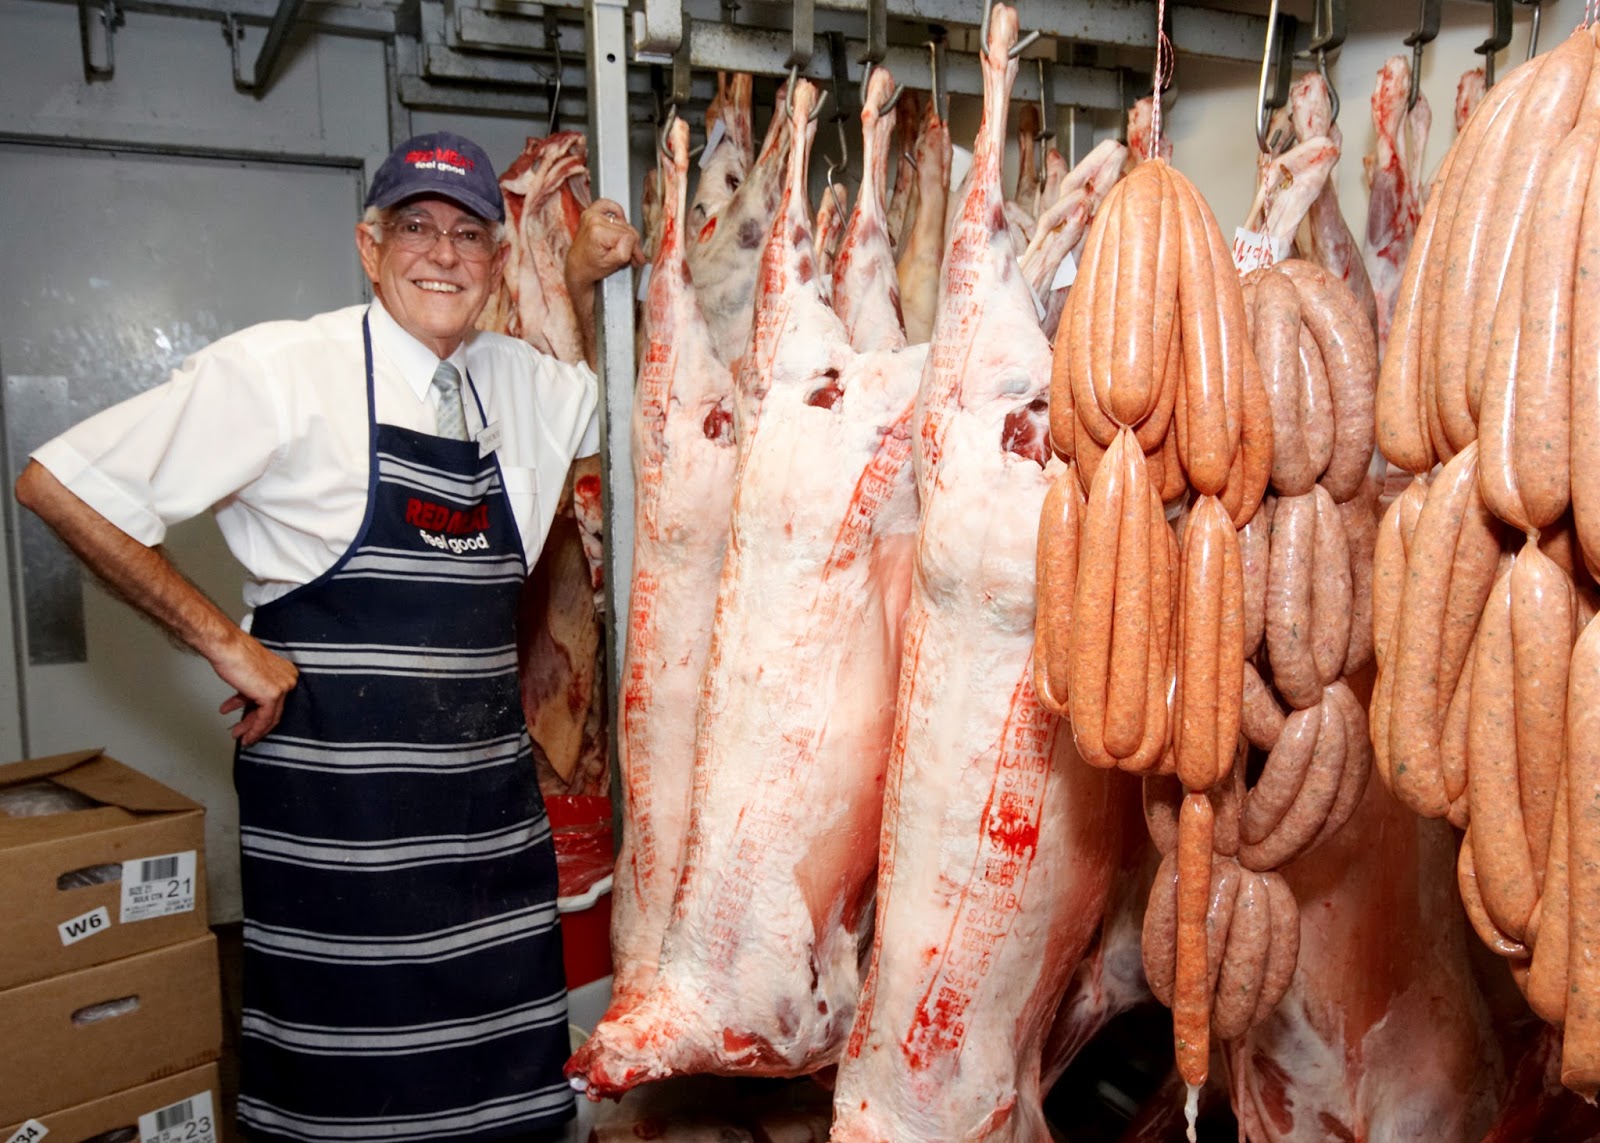 General Tips: The Butchers and Their important role in Preparing Meat